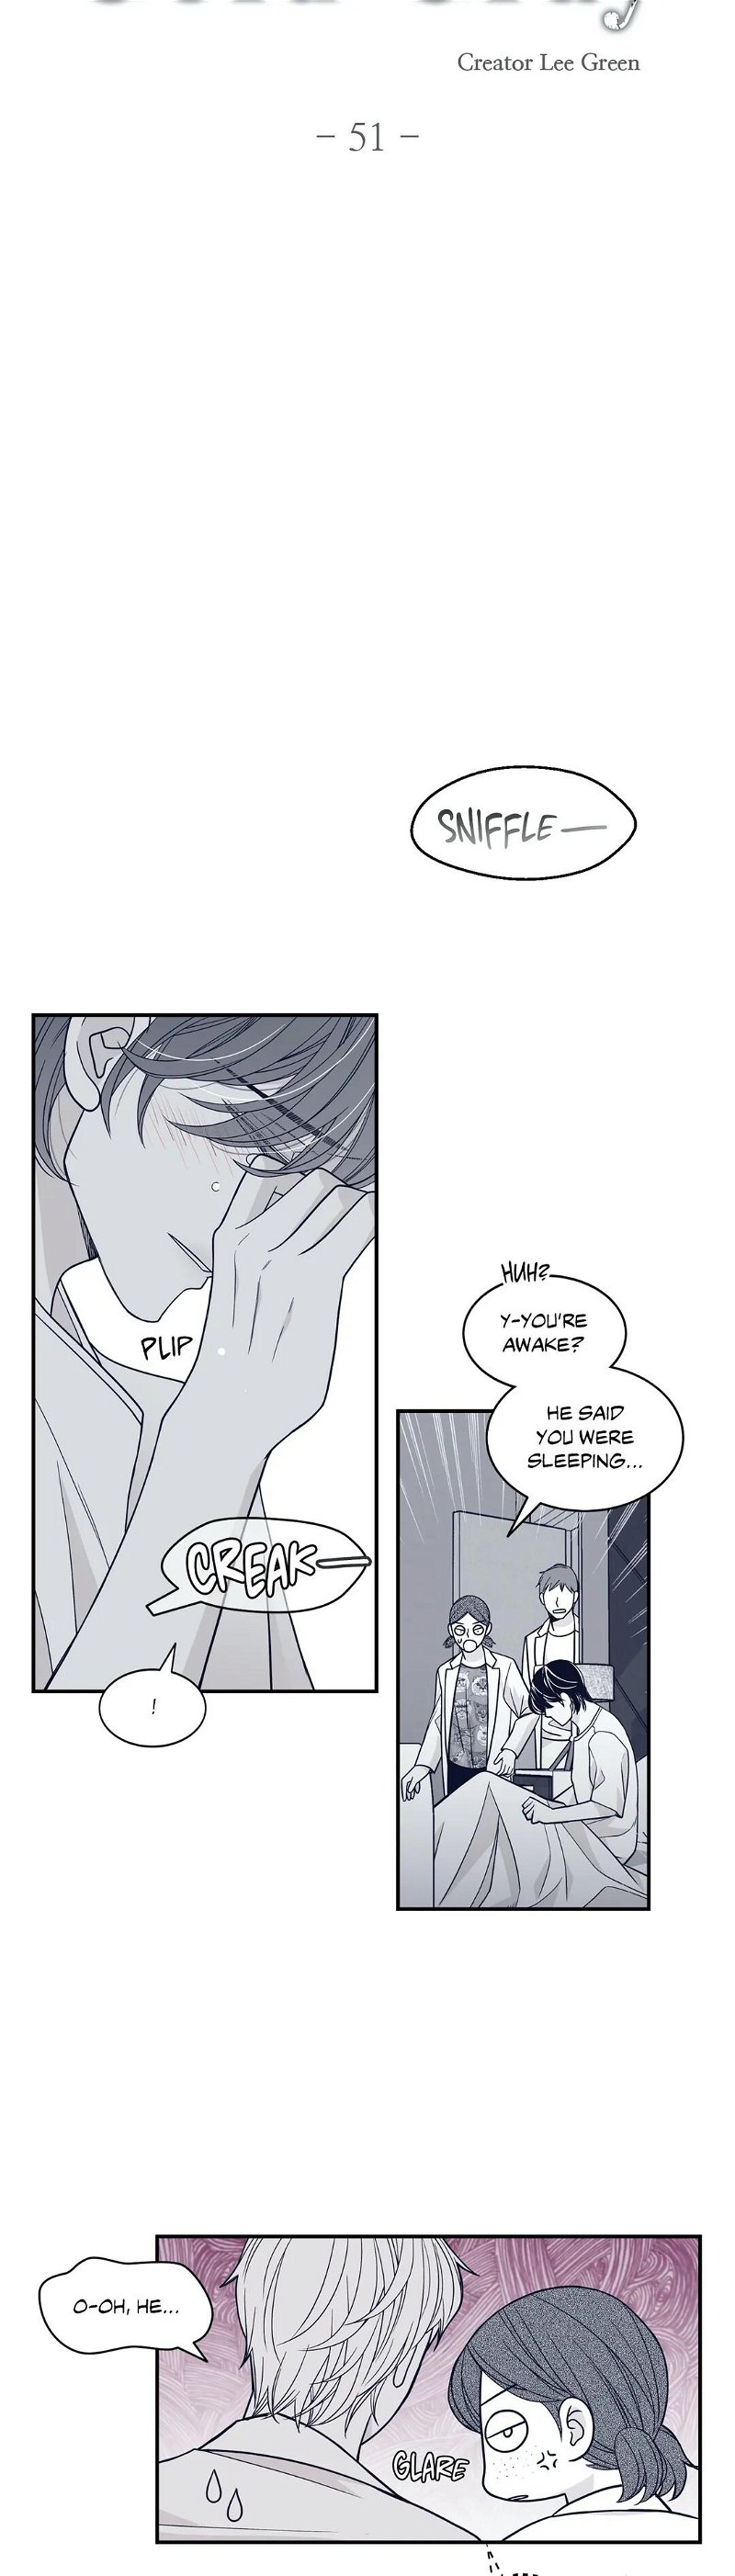 Gold Gray Chapter 51 - Page 4